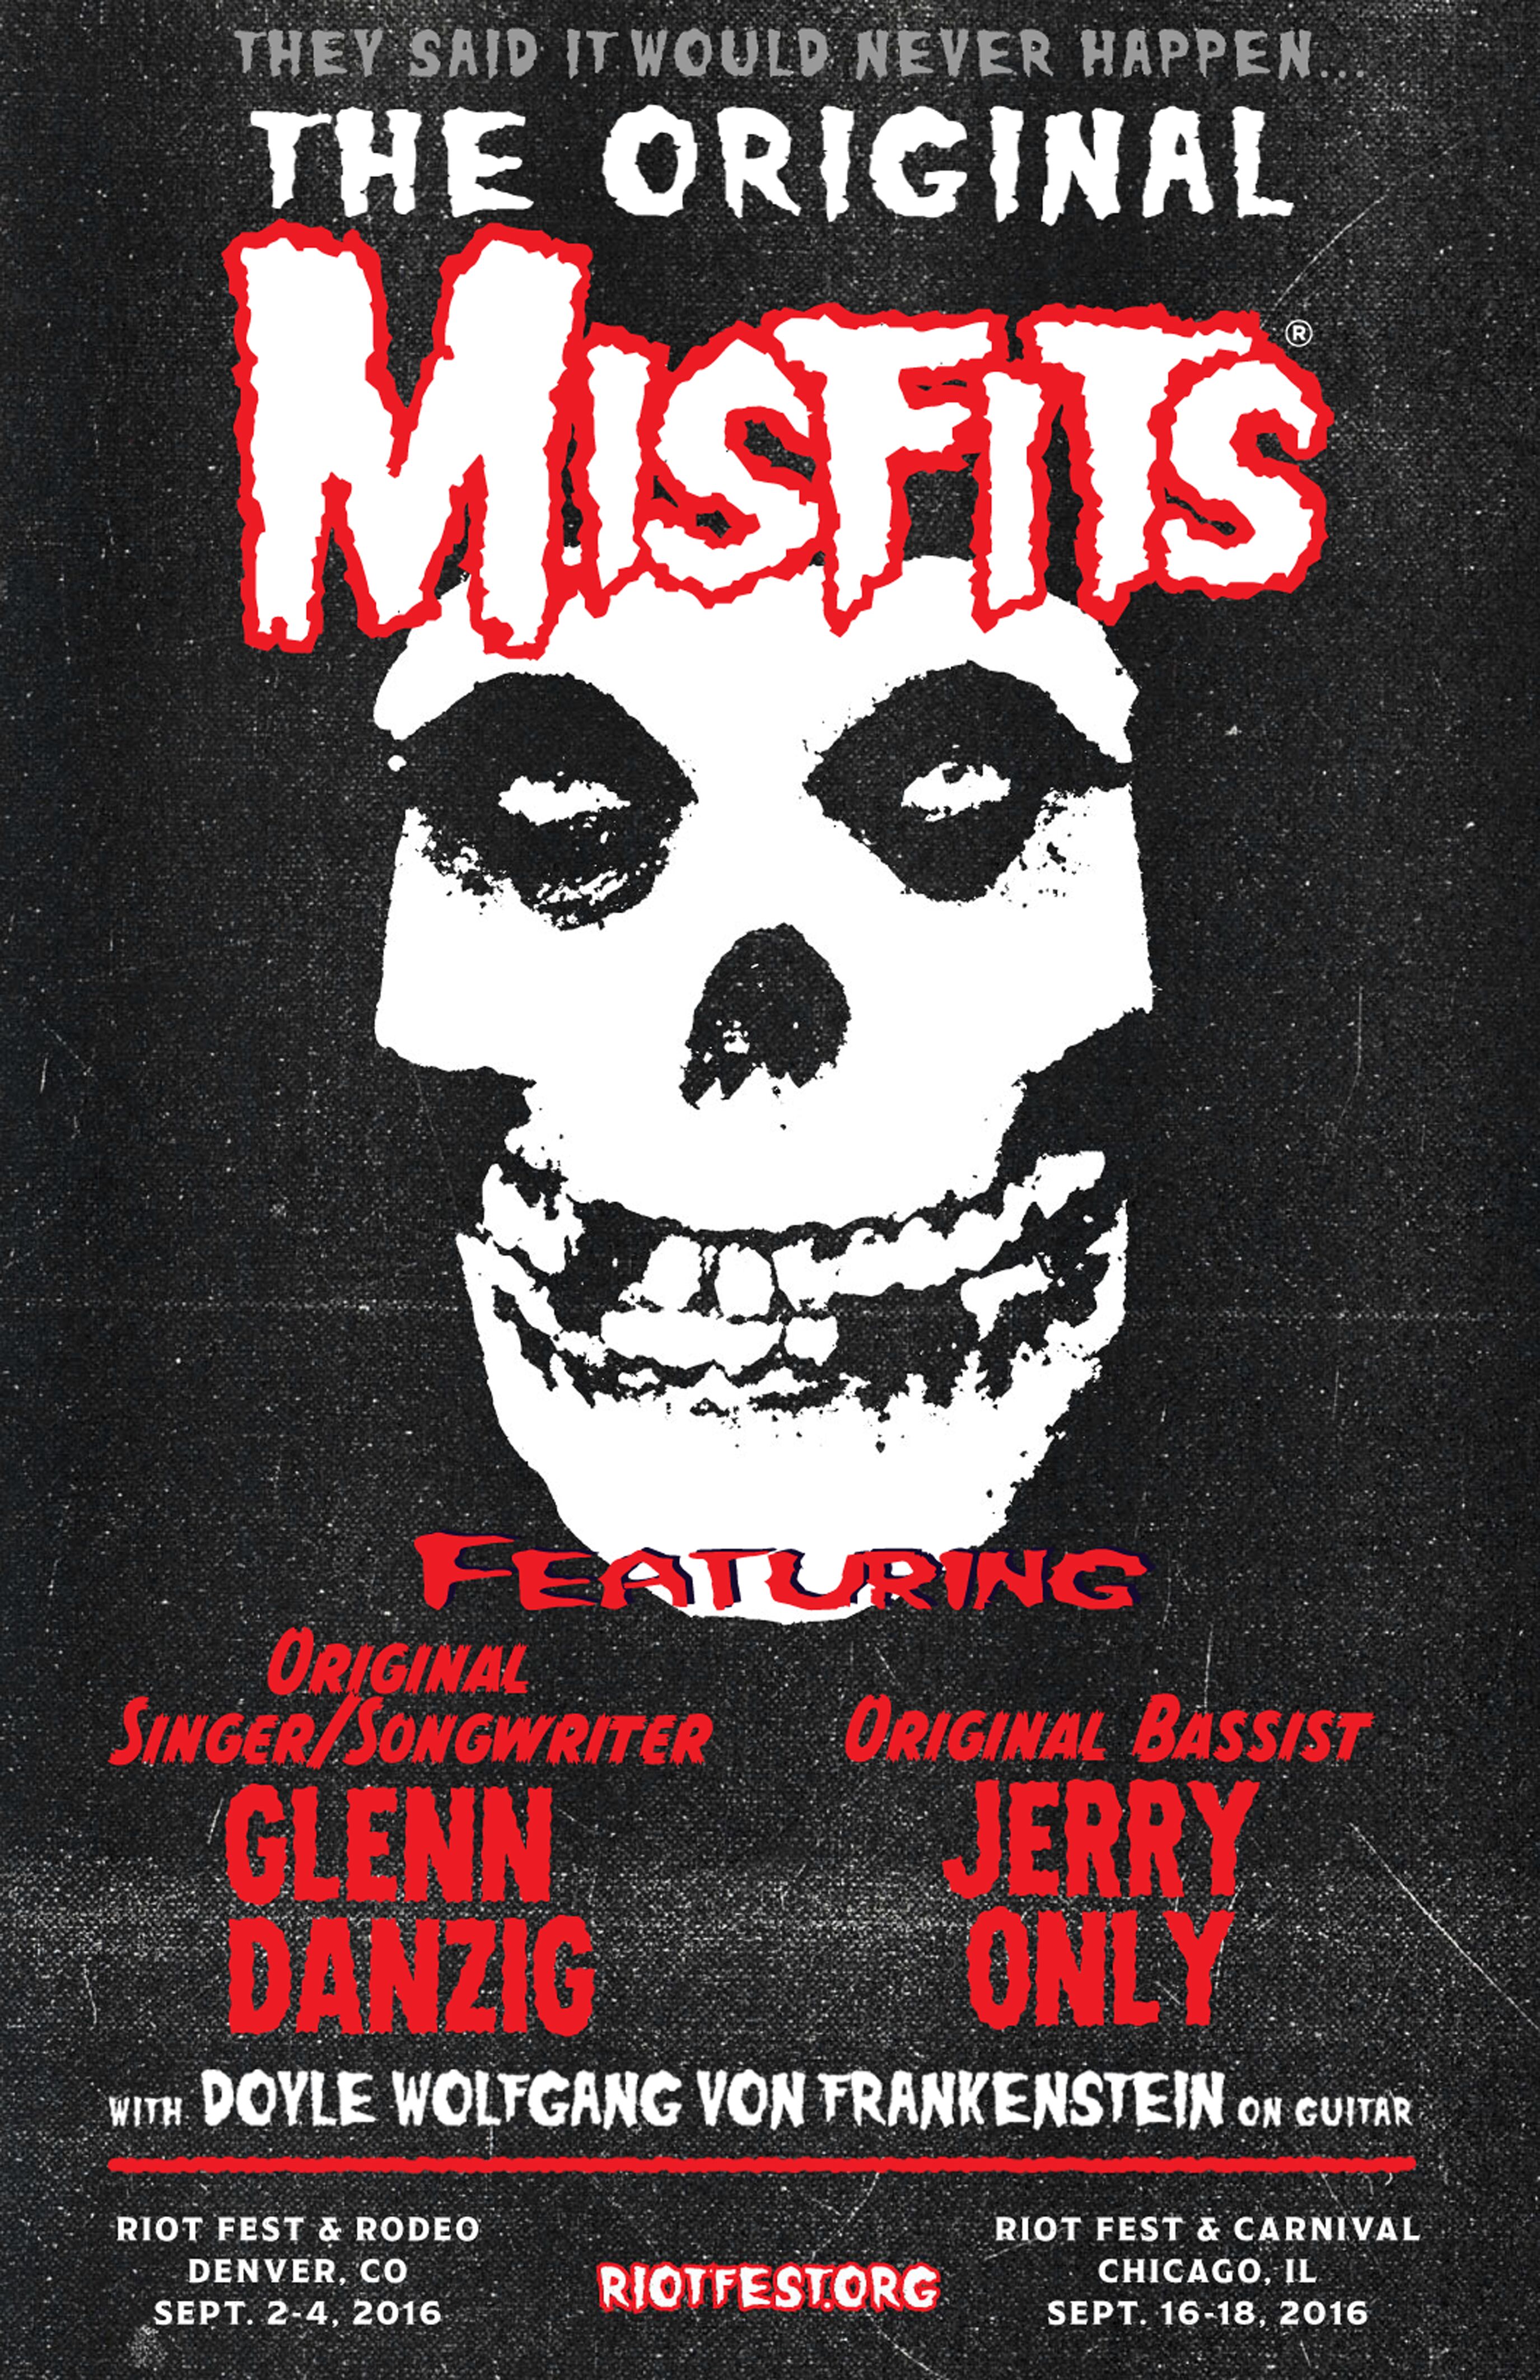 Glenn Danzig and Jerry Only to Reunite the Misfits at Riot Fest